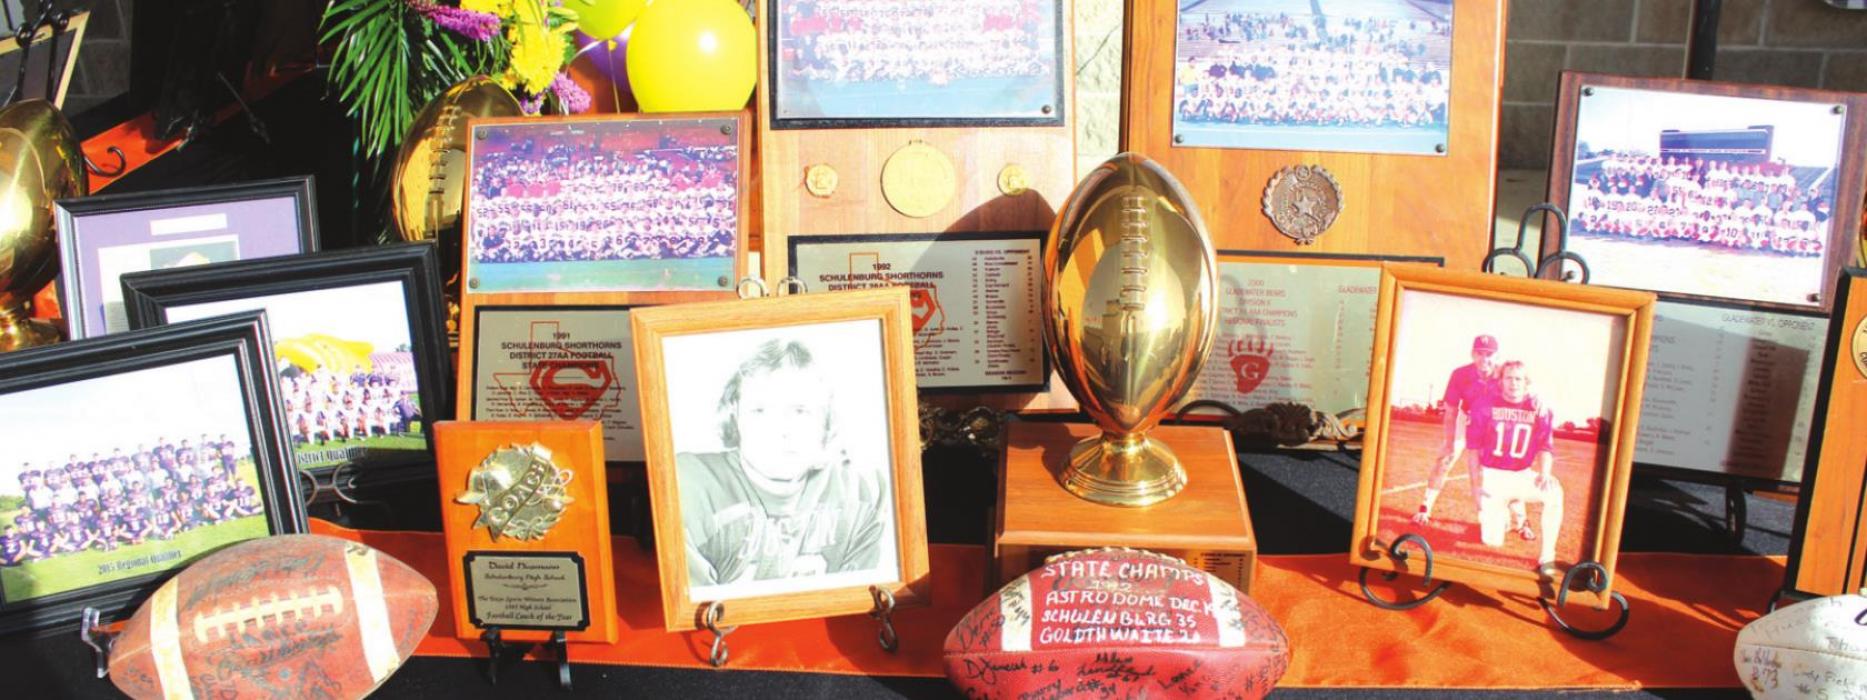 Memorabilia from David Husmann’s coaching career was on display at Saturday’s ceremony.